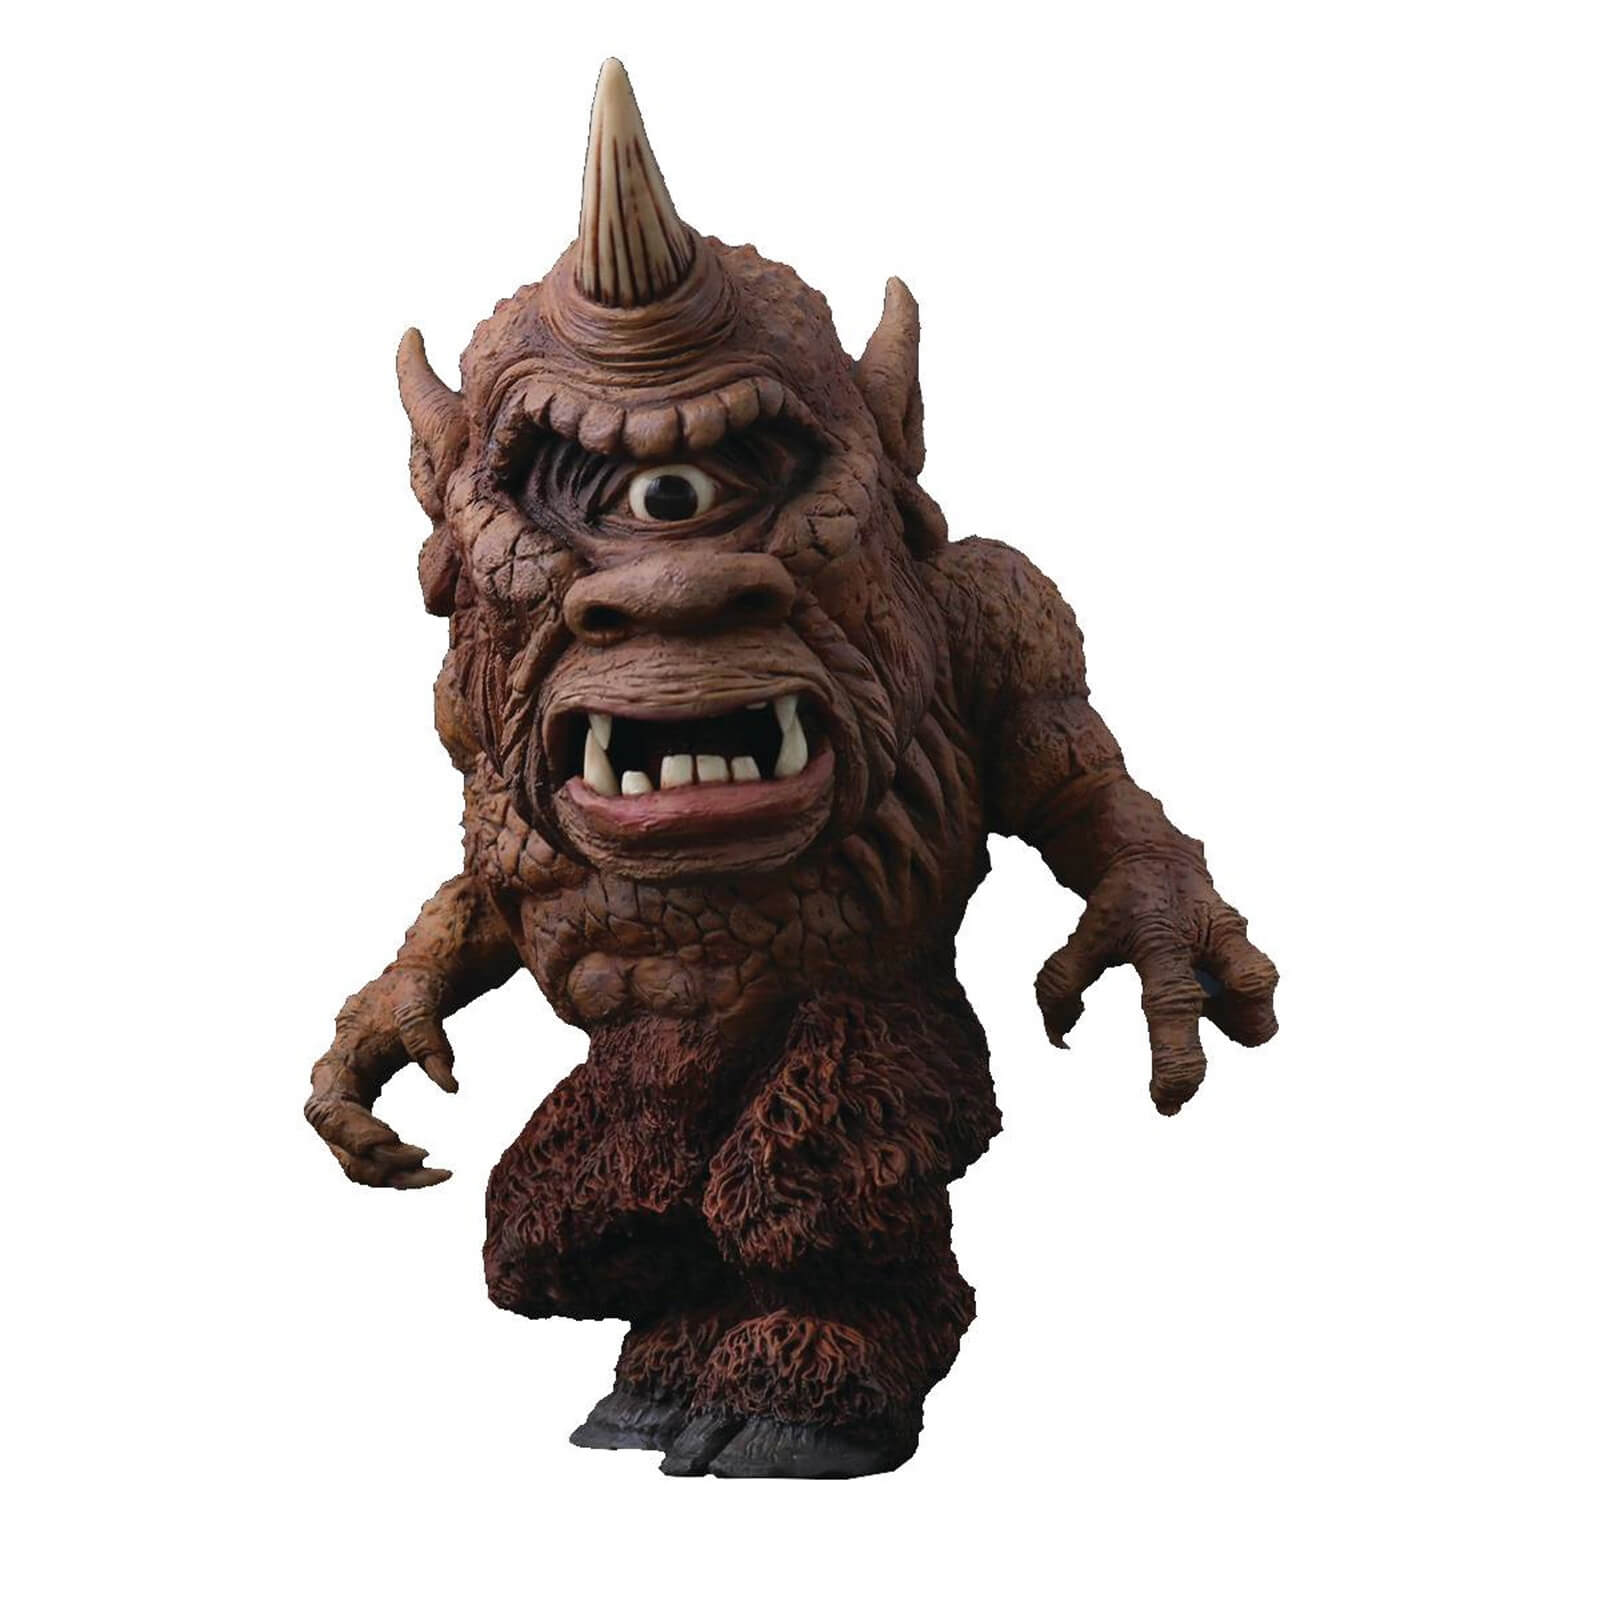 X-Plus DefoReal Series The 7th Voyage of Sinbad Soft Vinyl Figure - The Cyclops (1958)